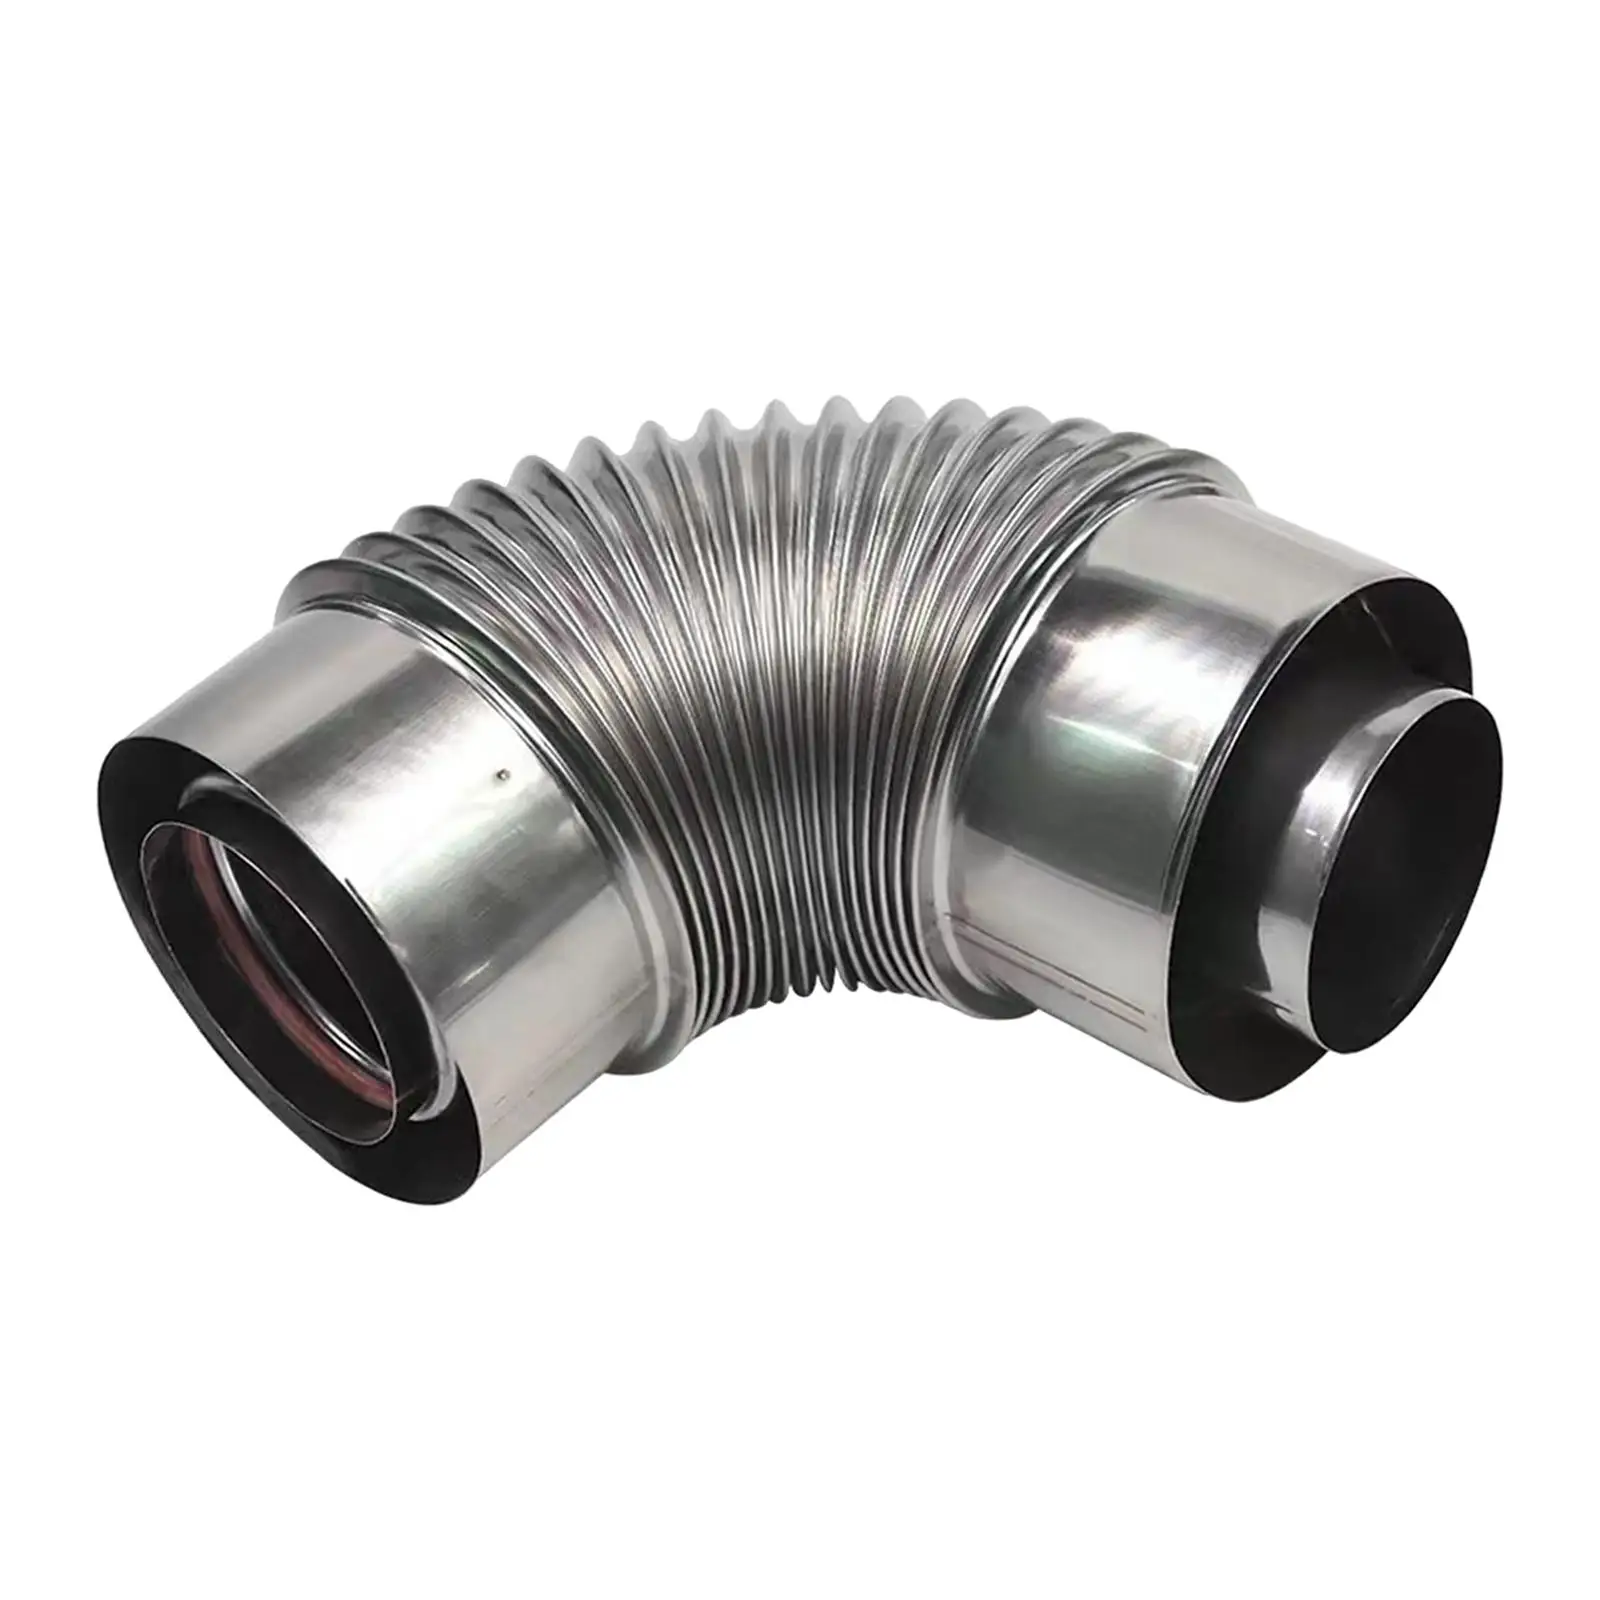 Stainless Steel Elbow Pipe Elbow Connector Flue Adapter Tube Chimney Flue for Heater Greenhouse Bathroom Farmhouse Kitchen